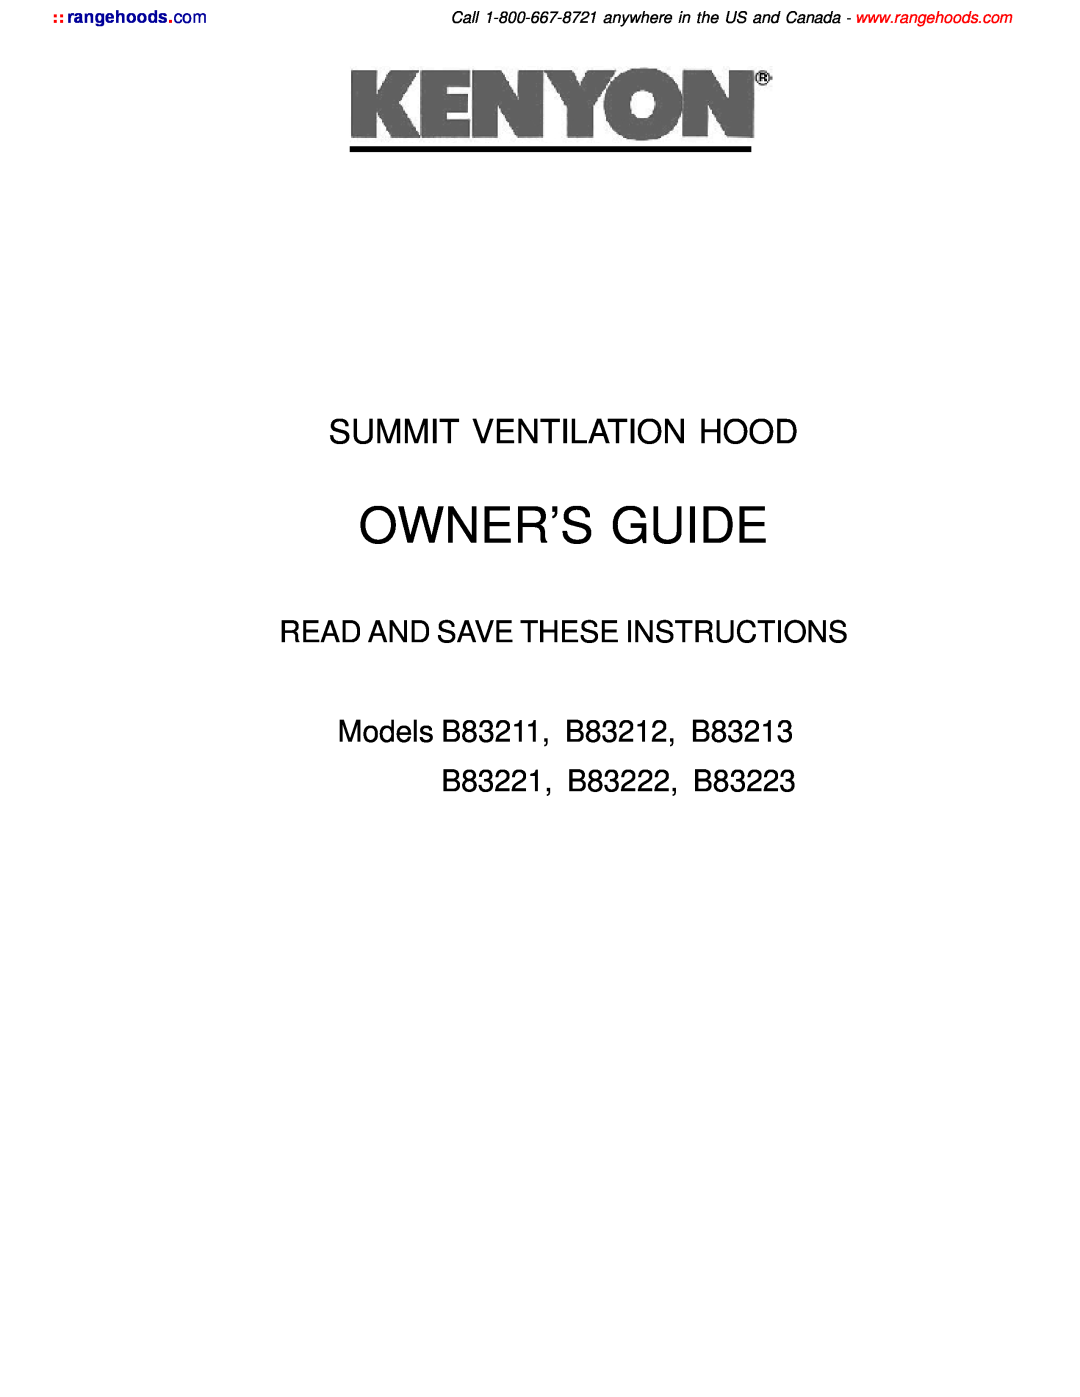 Kenyon B83221, B83212, B83211, B83223, B83222 manual Owner’S Guide, Summit Ventilation Hood, Read And Save These Instructions 